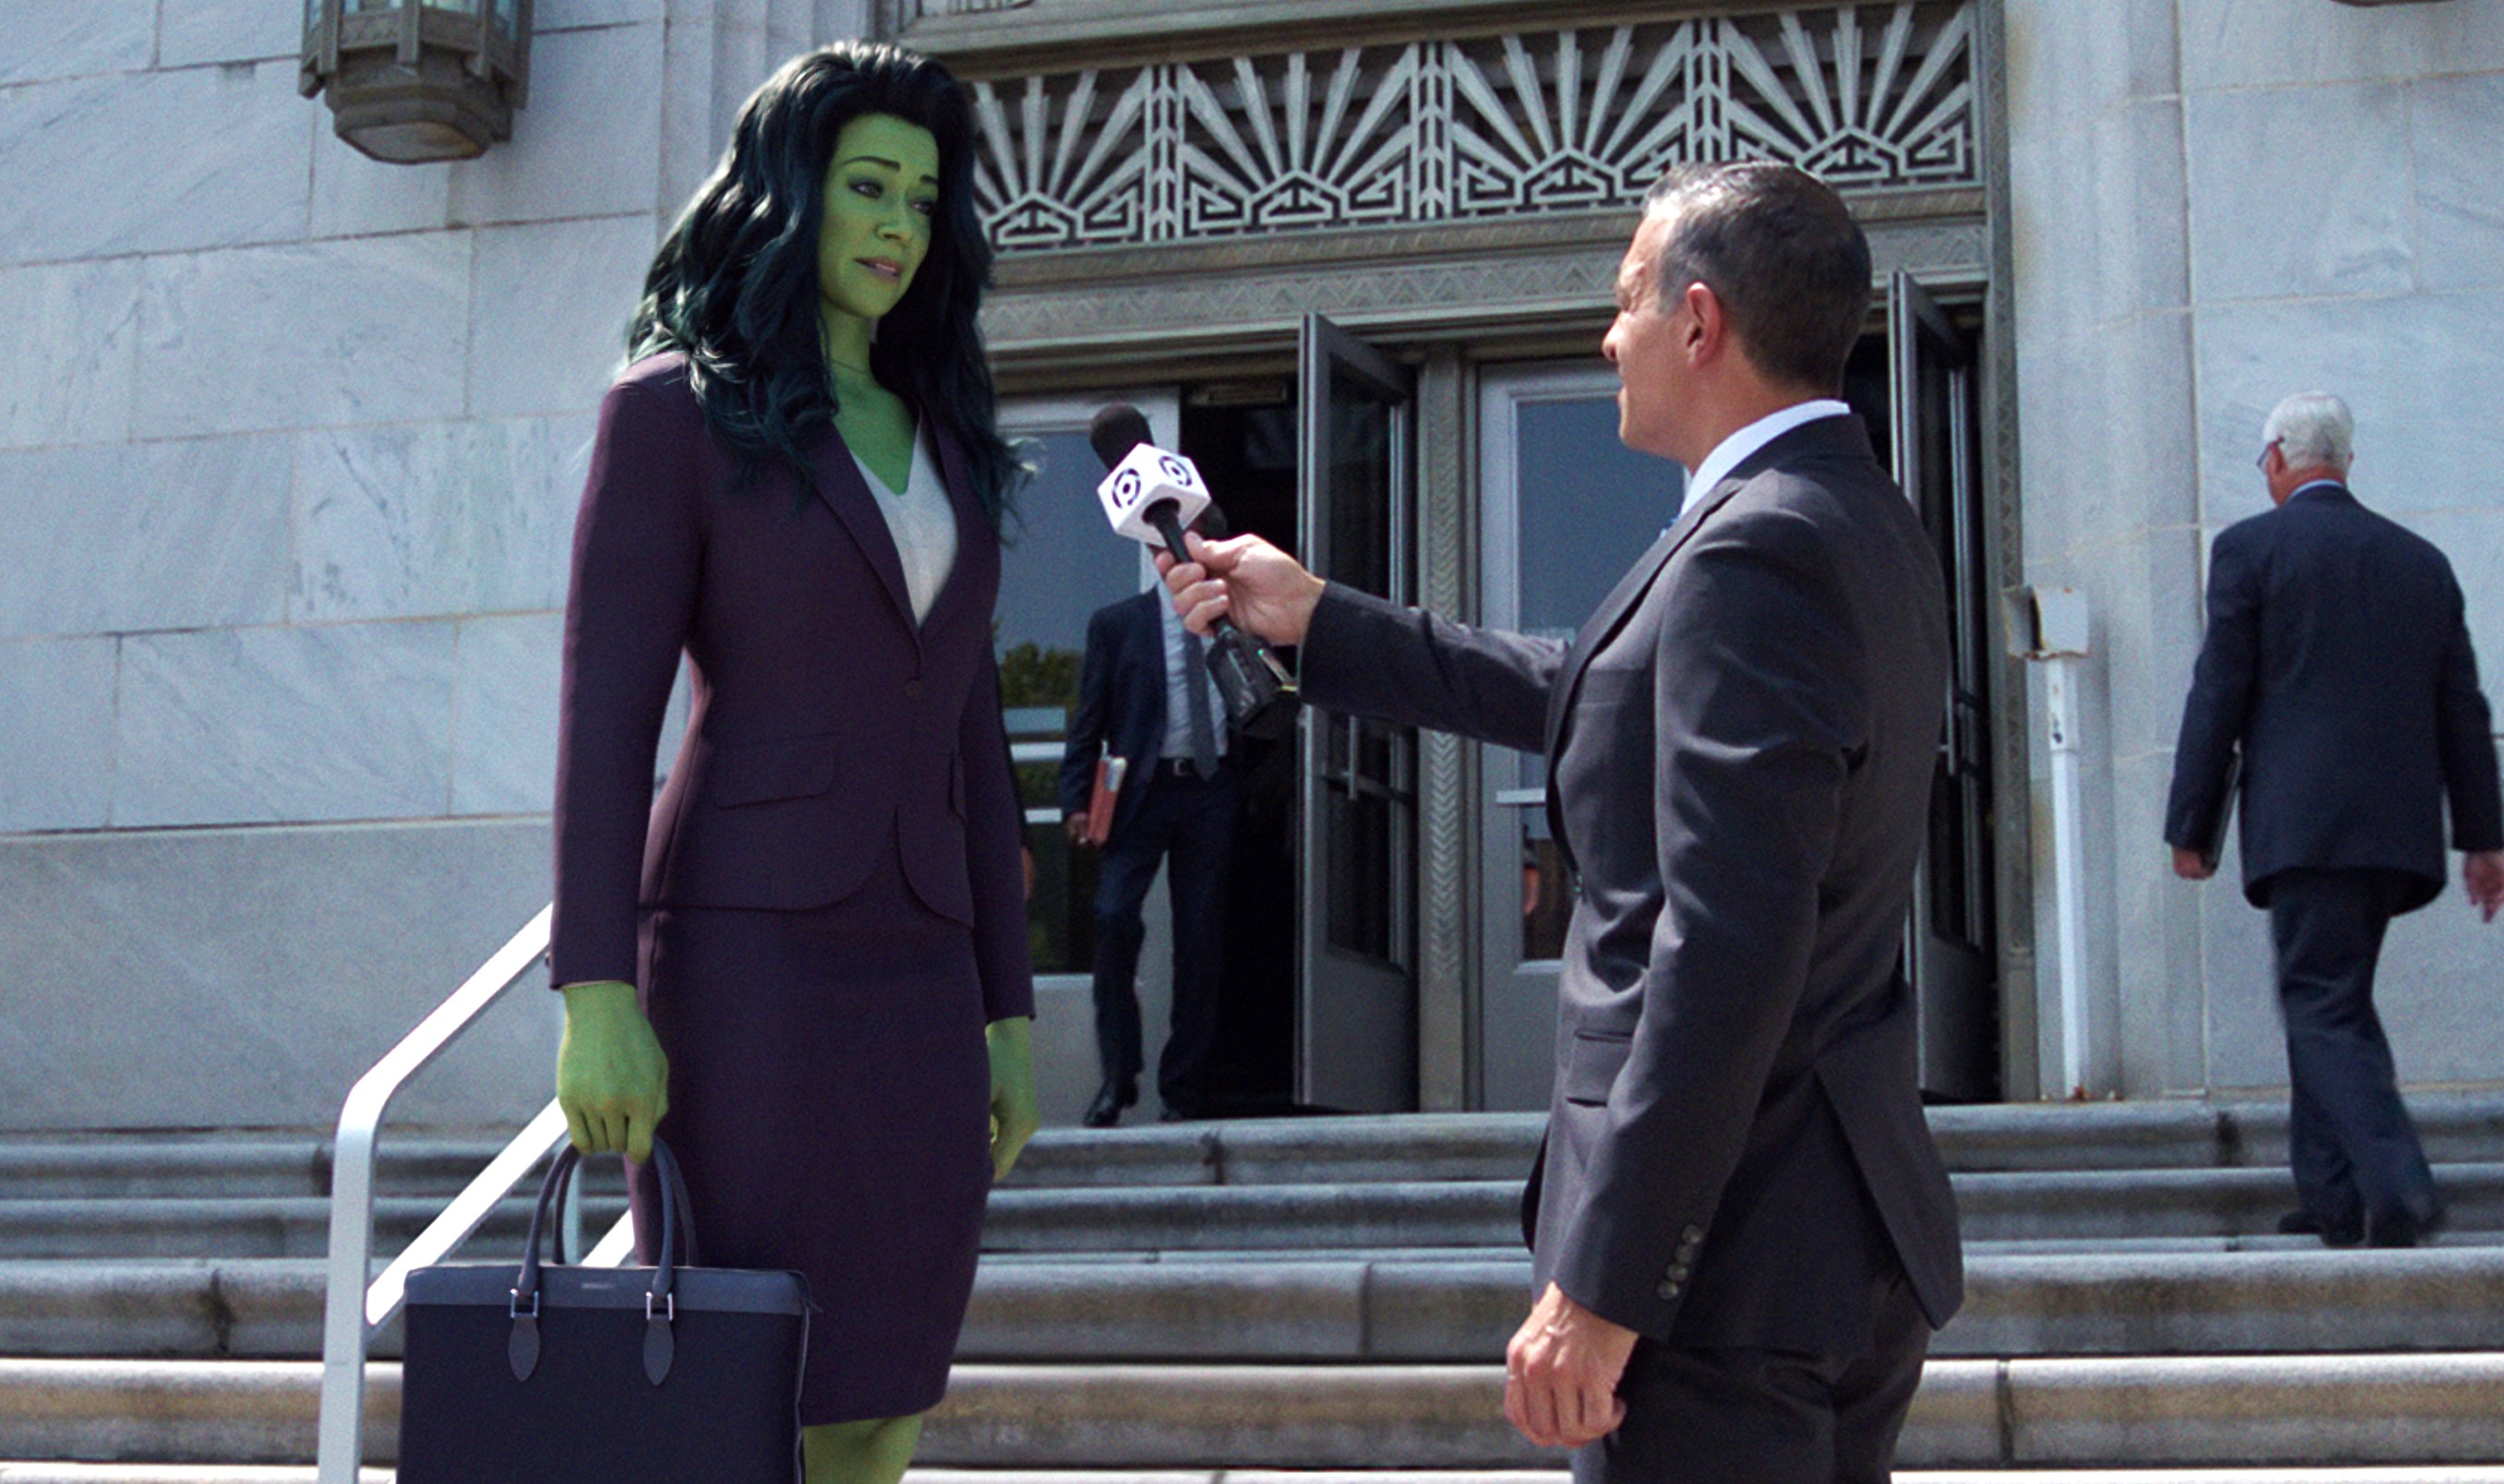 SHE-HULK ATTORNEY AT LAW (2022, Disney+) Episode 7 The Retreat